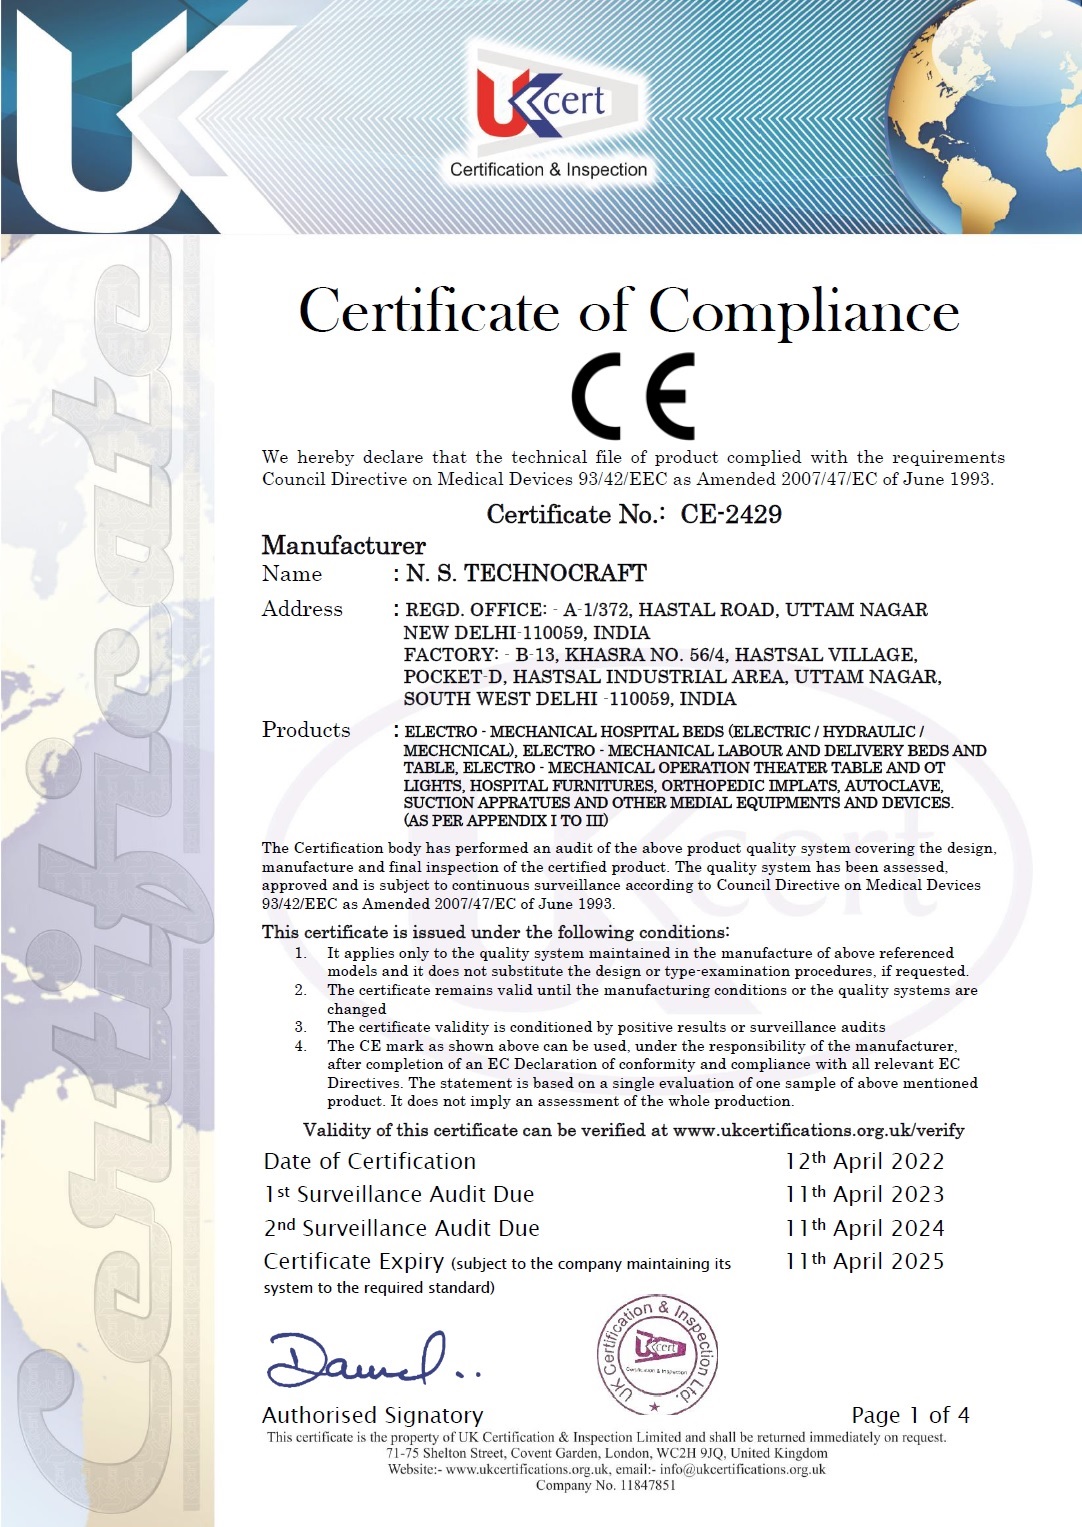 NST CE CERTIFICATE Page 1 of 4 2022-25